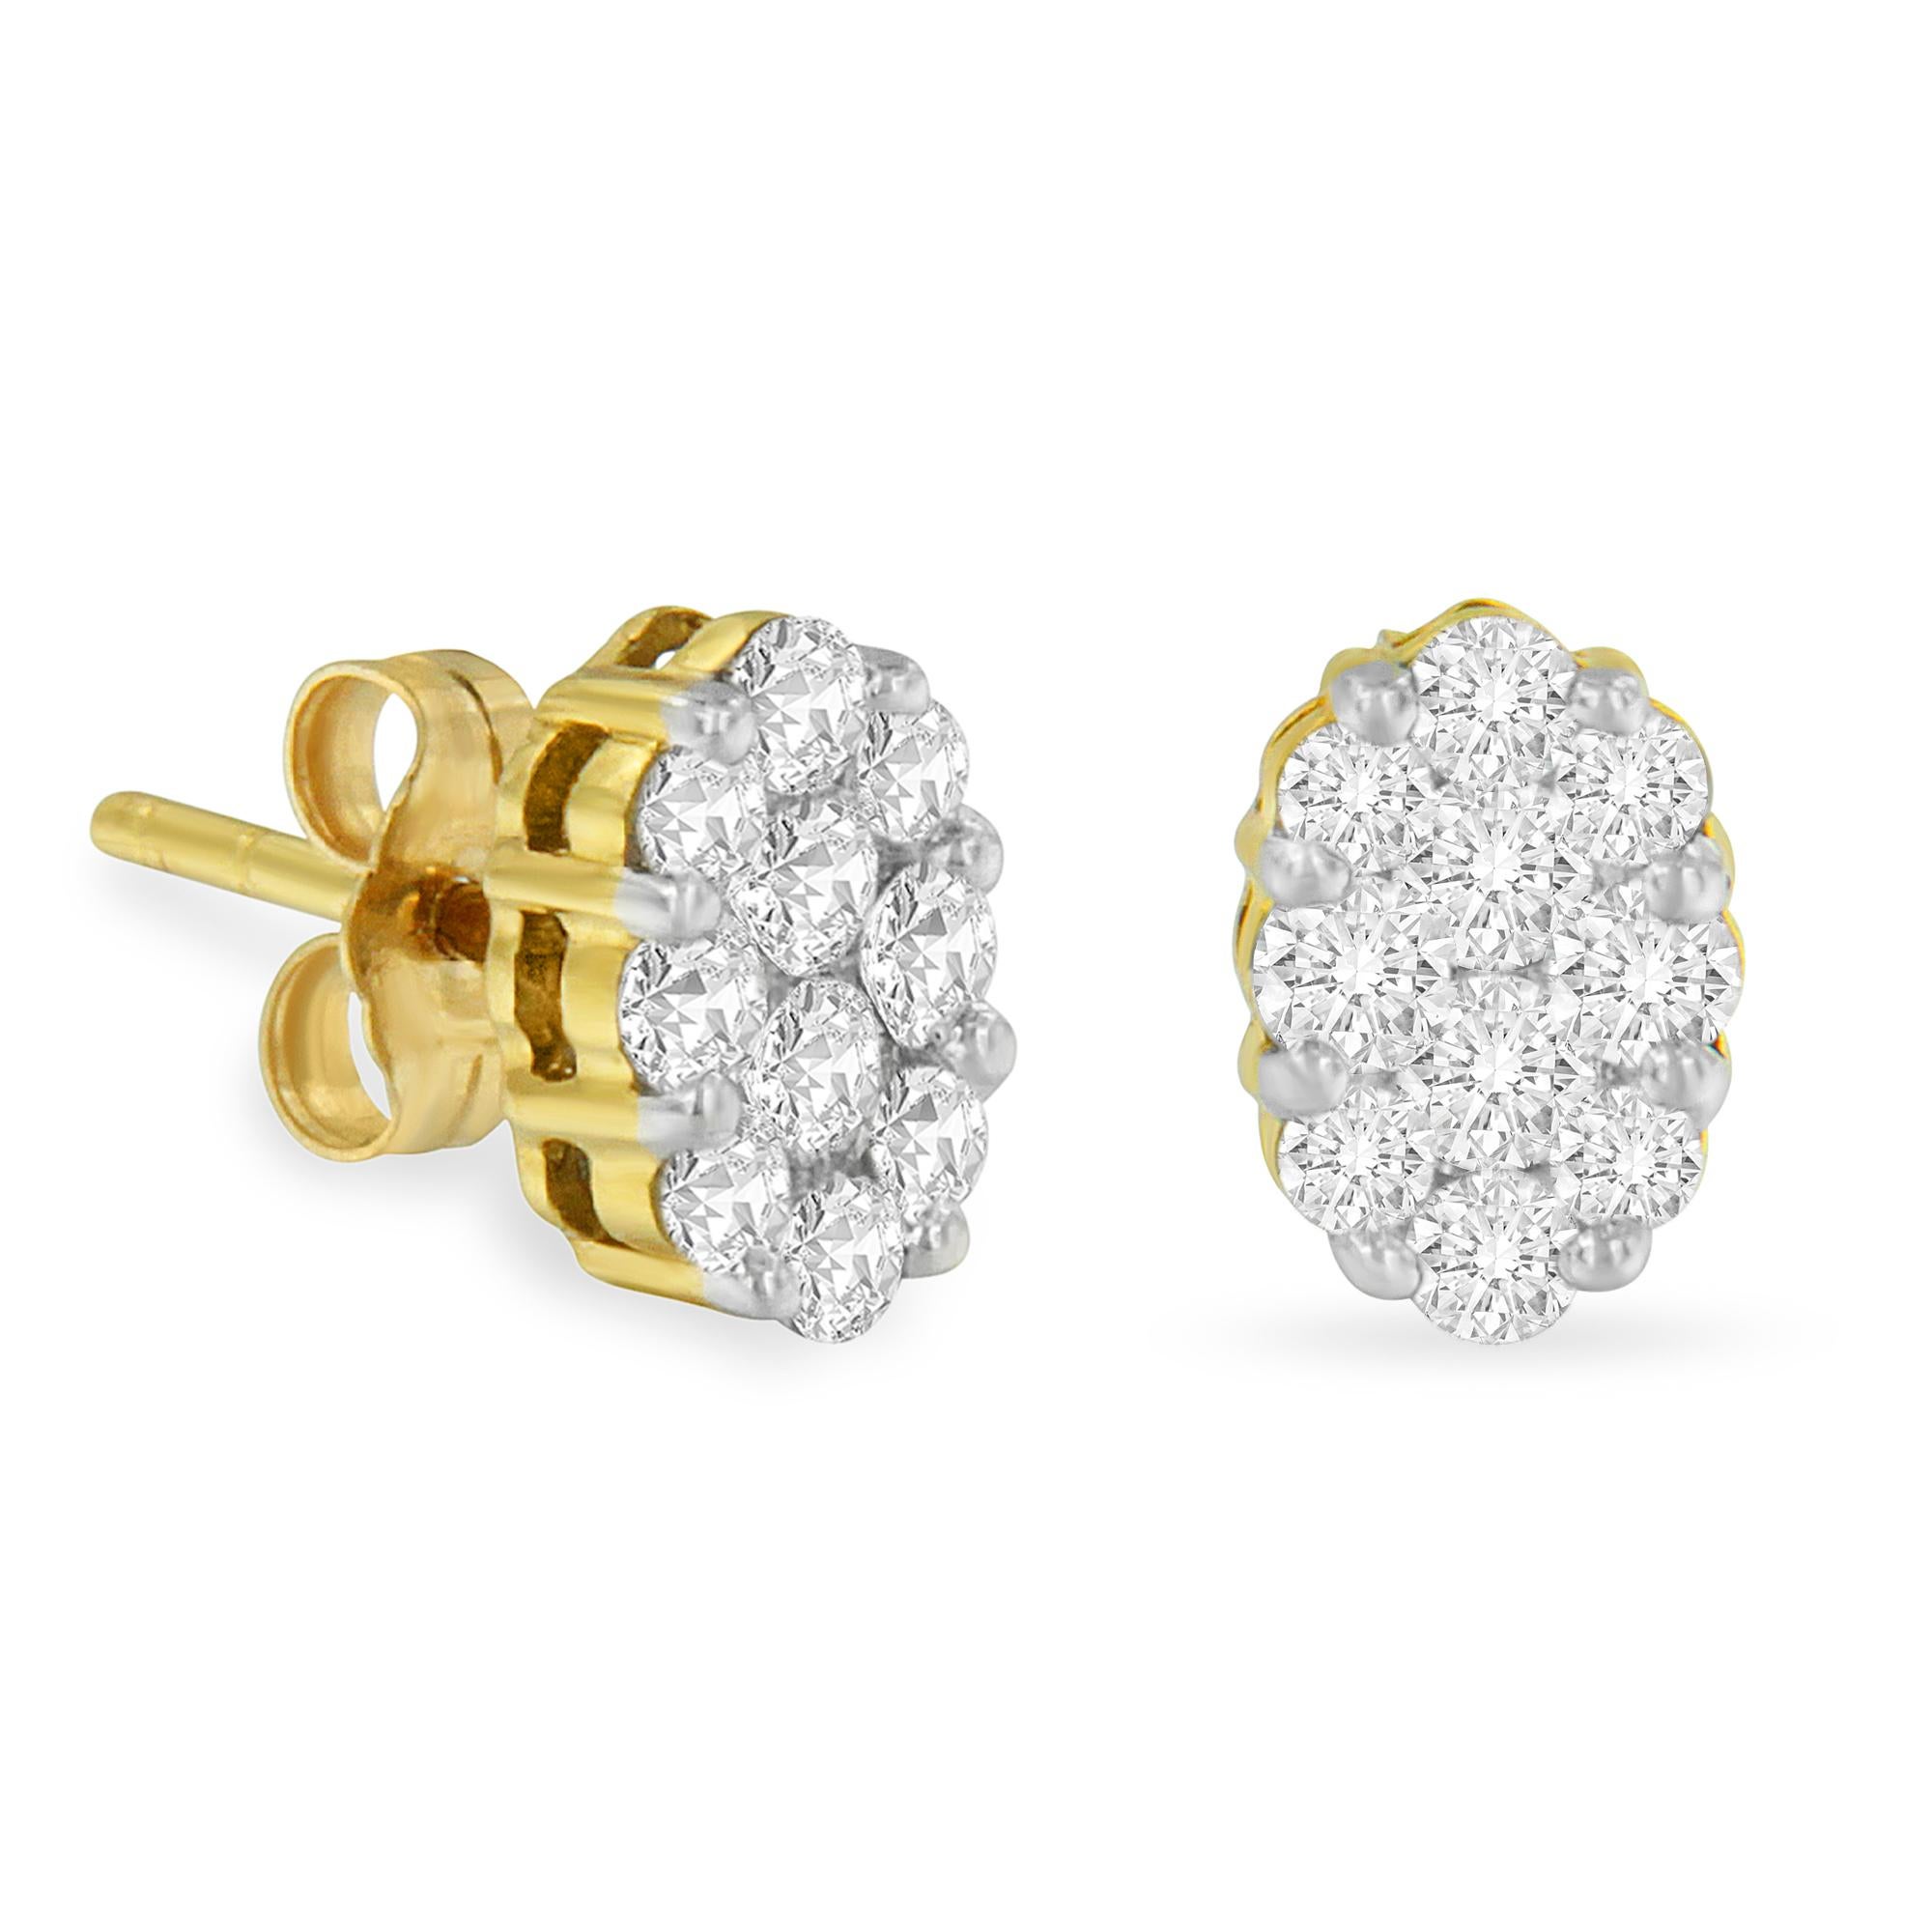 Make an impression on the jewelry lovers with these dainty diamond stud earrings. Stylish and sophisticated, the earrings are constructed of 18 karat yellow gold with intricate detail. Each piece has 10 natural, round diamonds prong set in a cluster